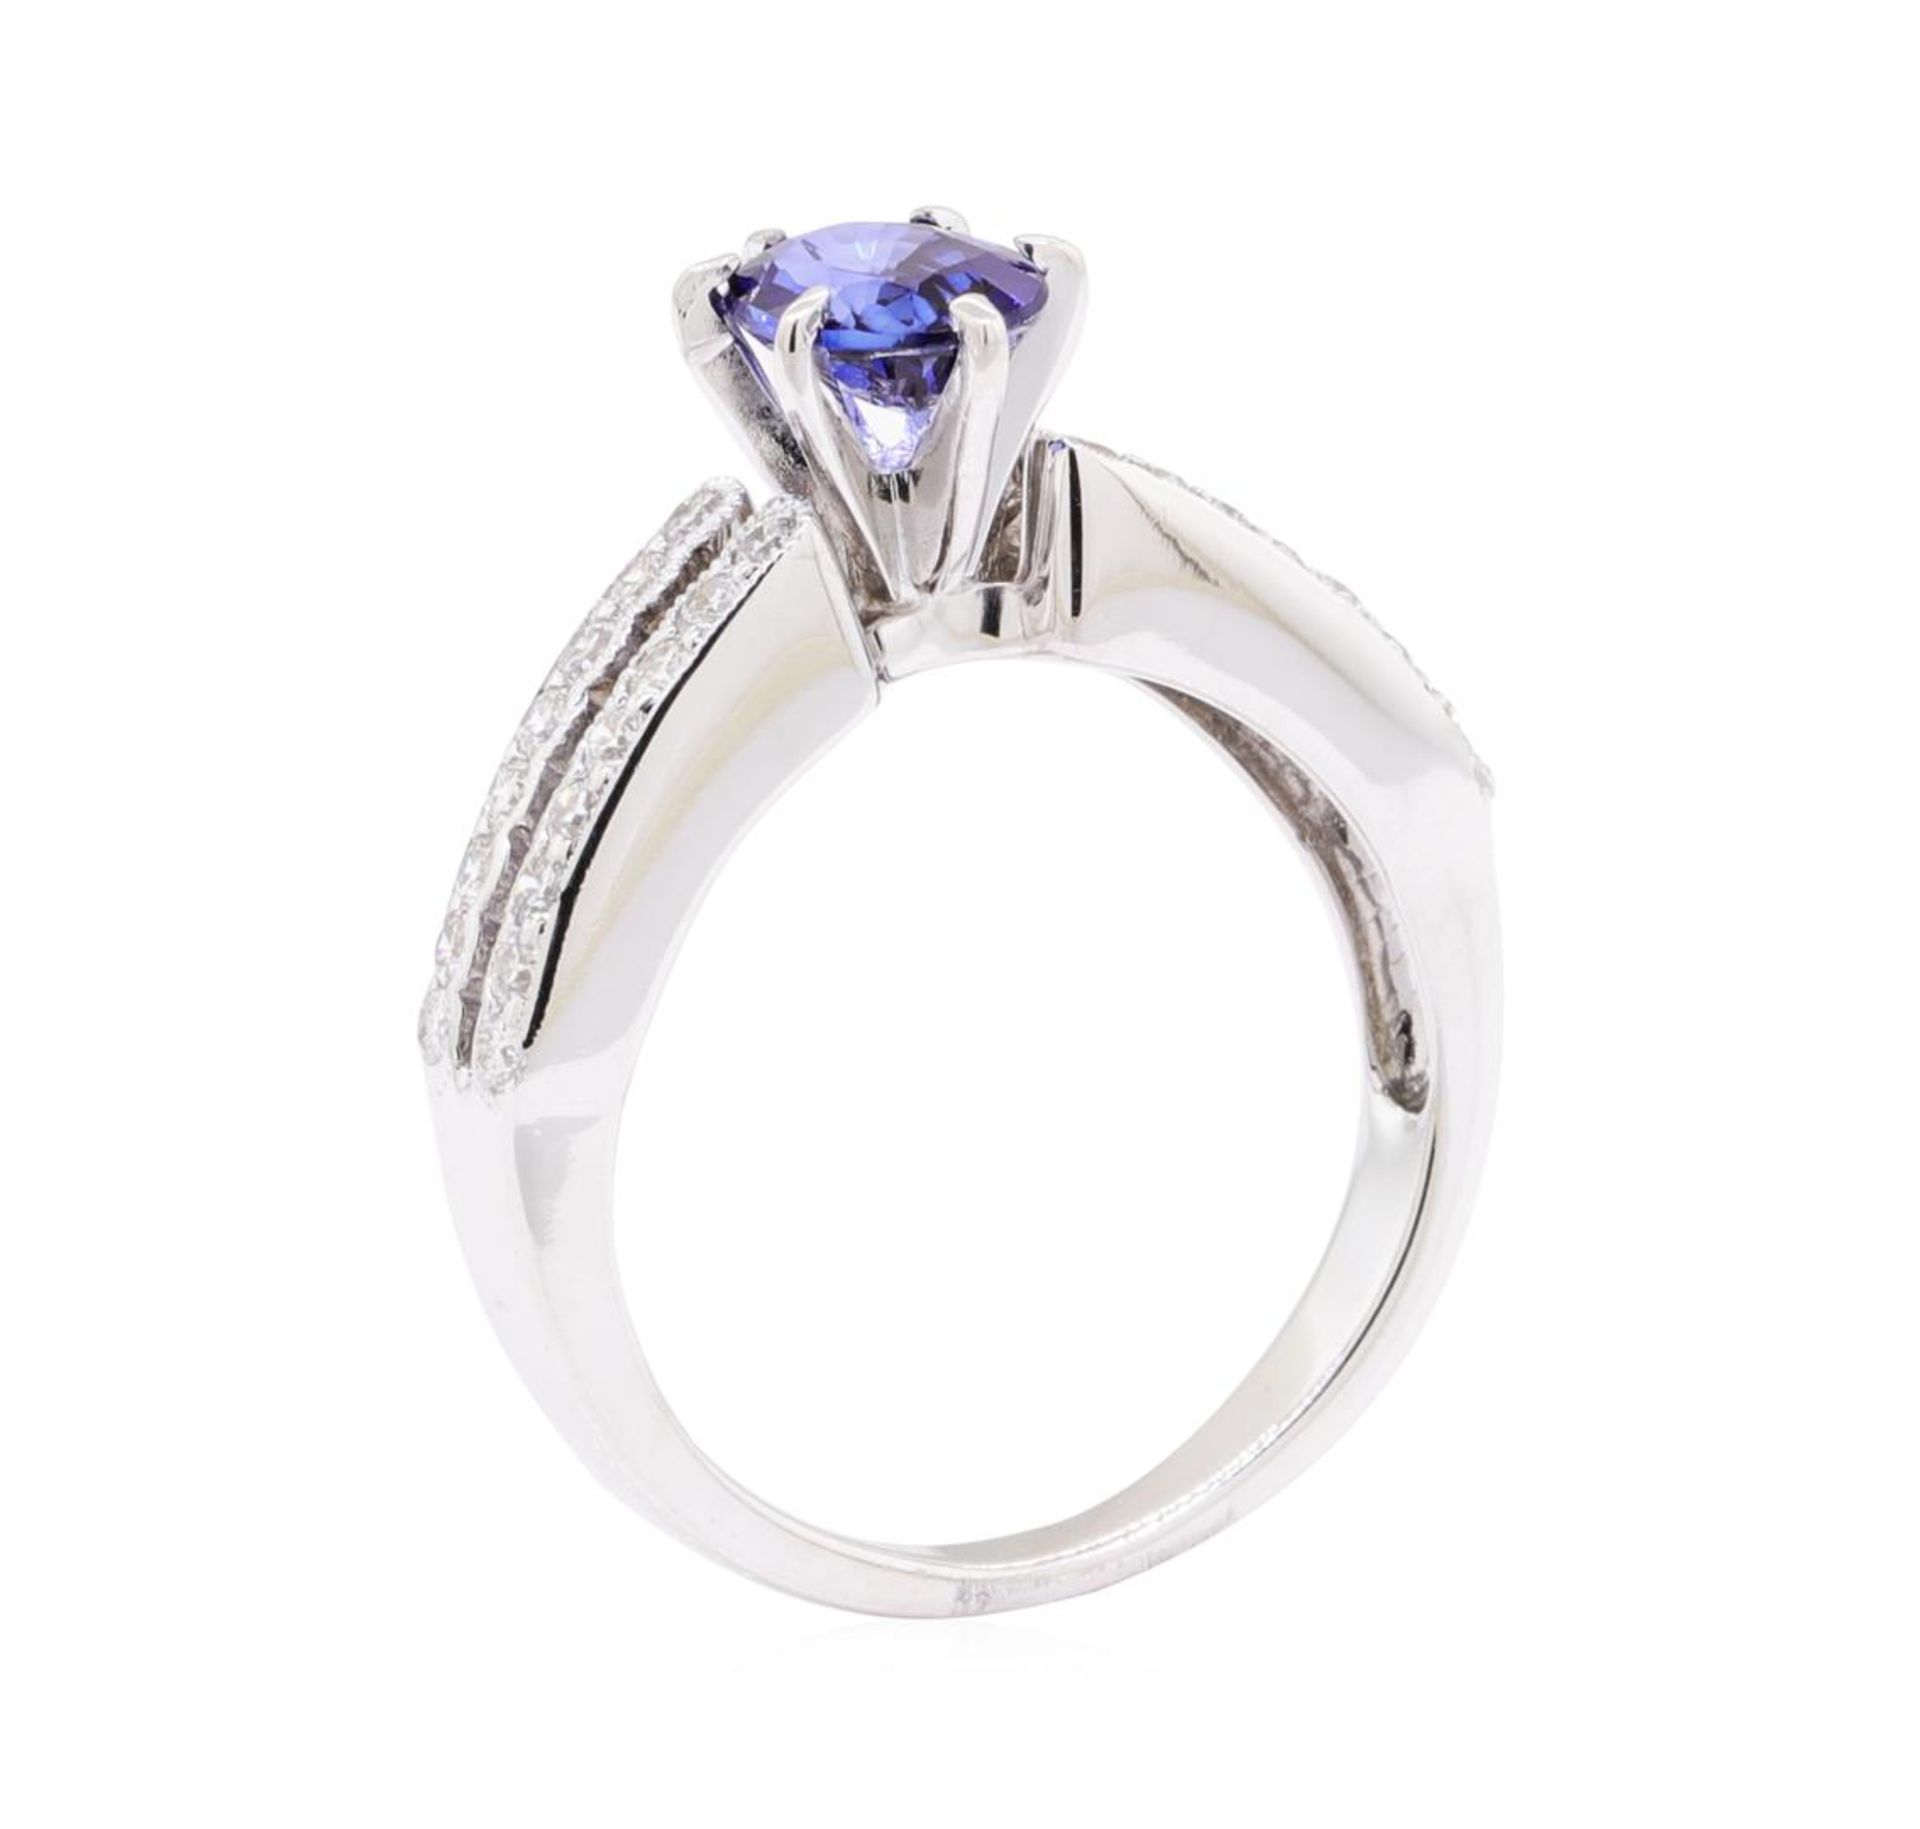 0.88ct Sapphire and Diamond Ring - 18KT White Gold - Image 4 of 4